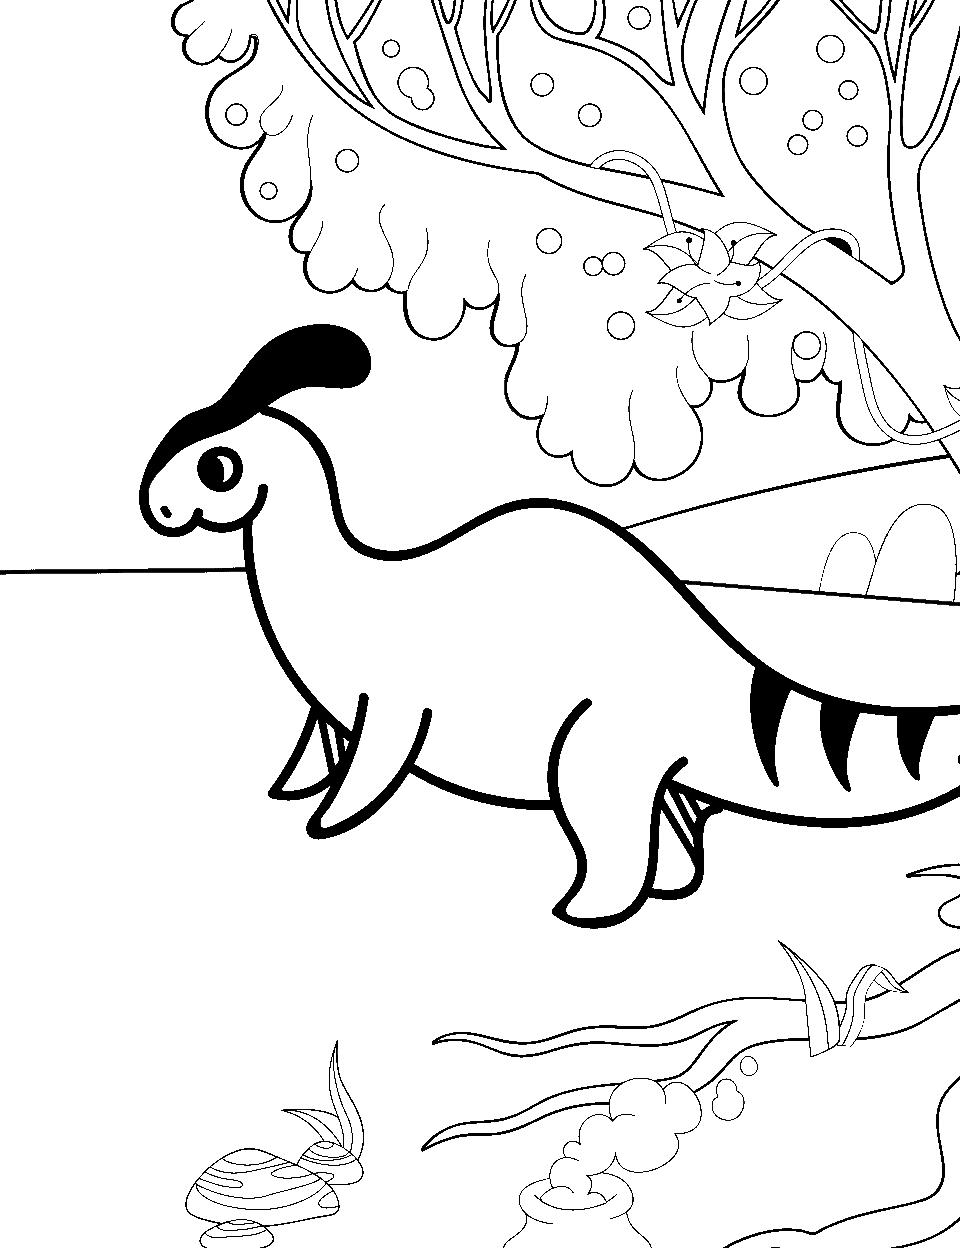 Dinosaur Discovery Coloring Page - A big dinosaur roaming in a prehistoric setting.